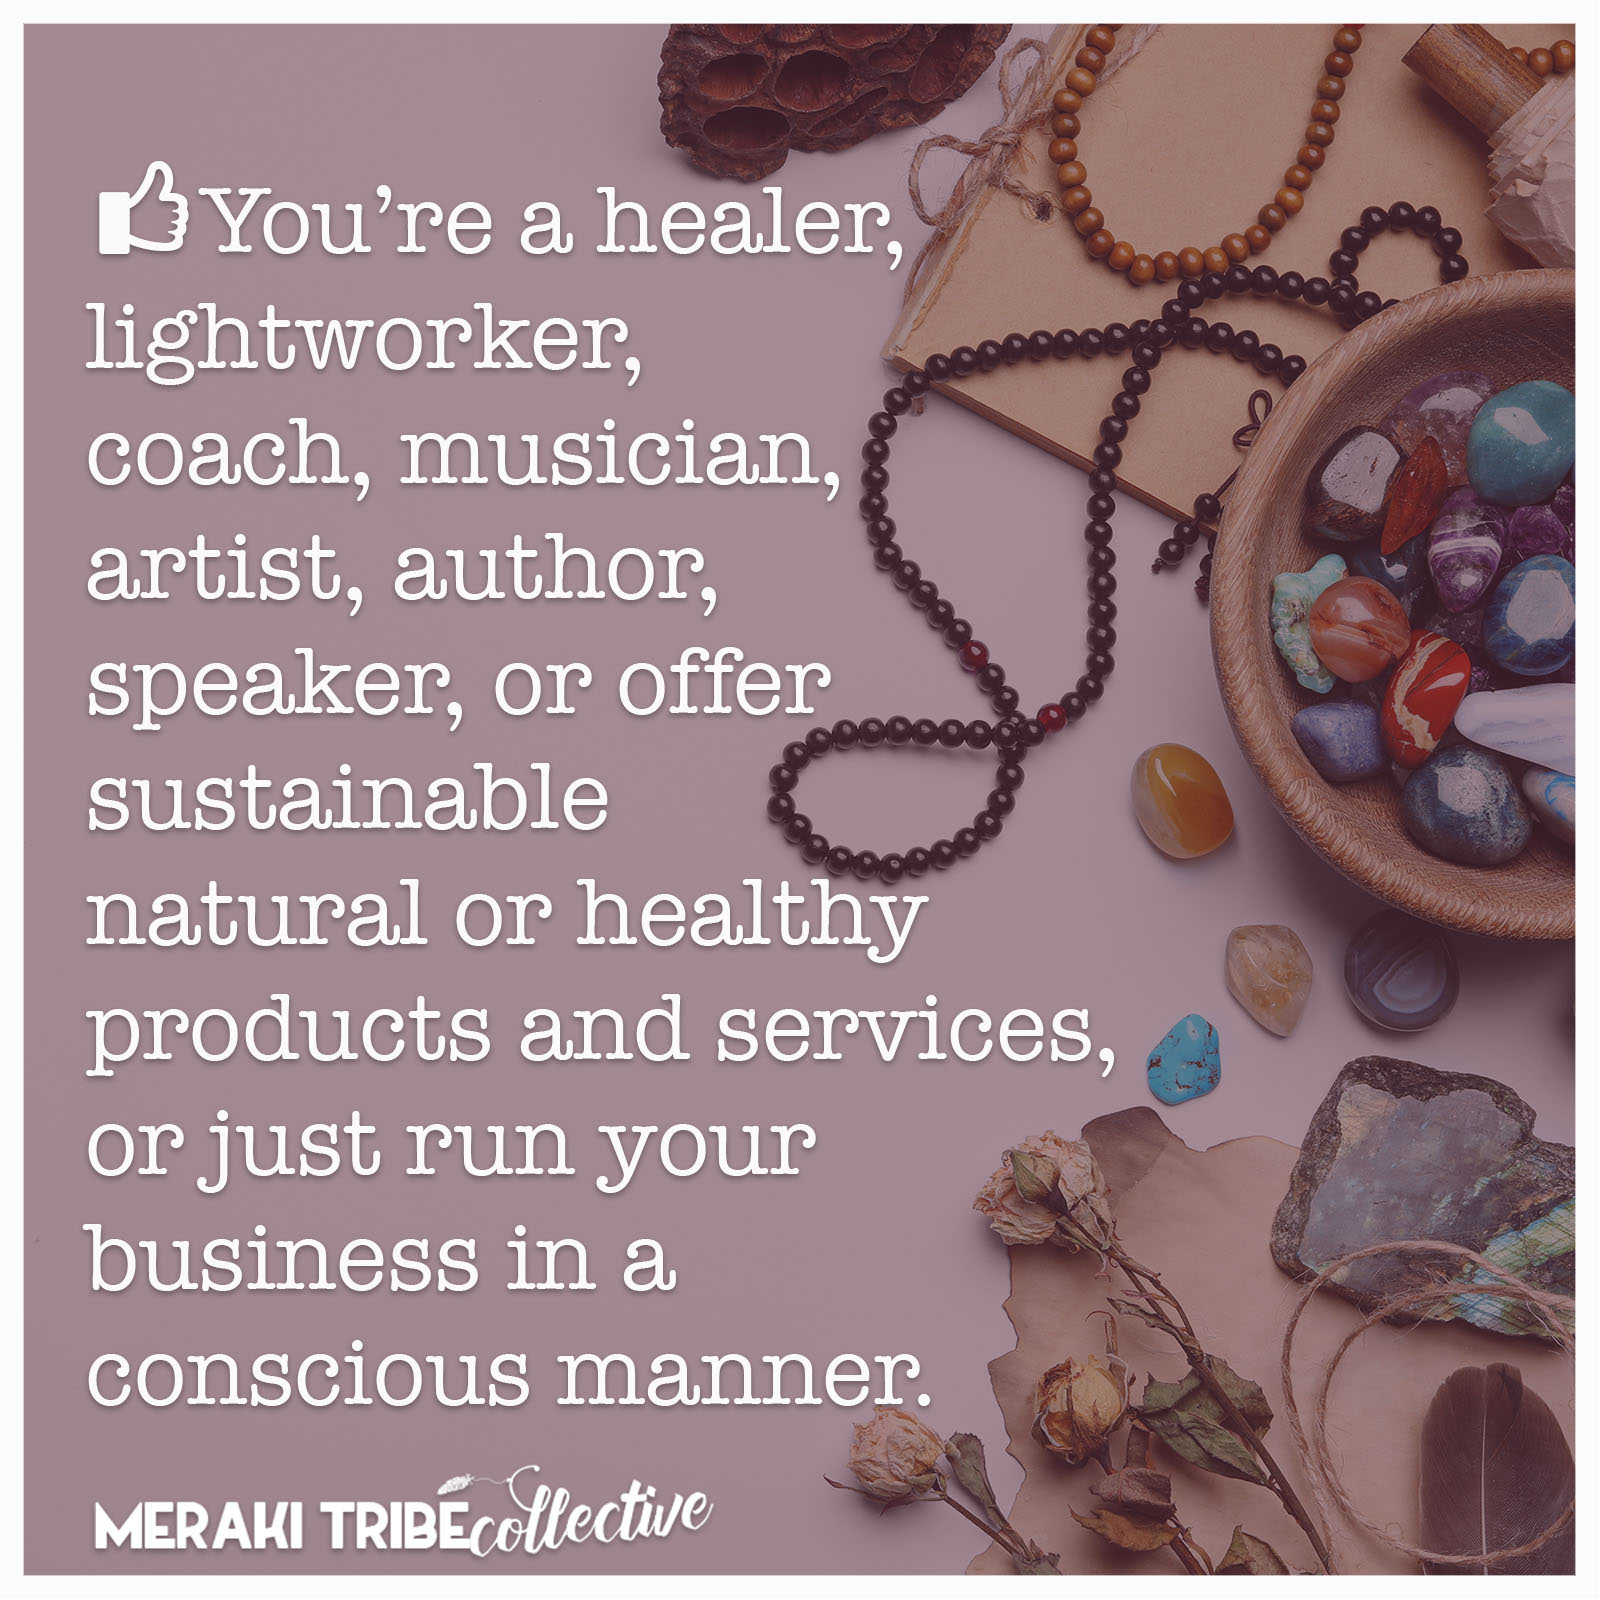 lightworker healers and coaches 